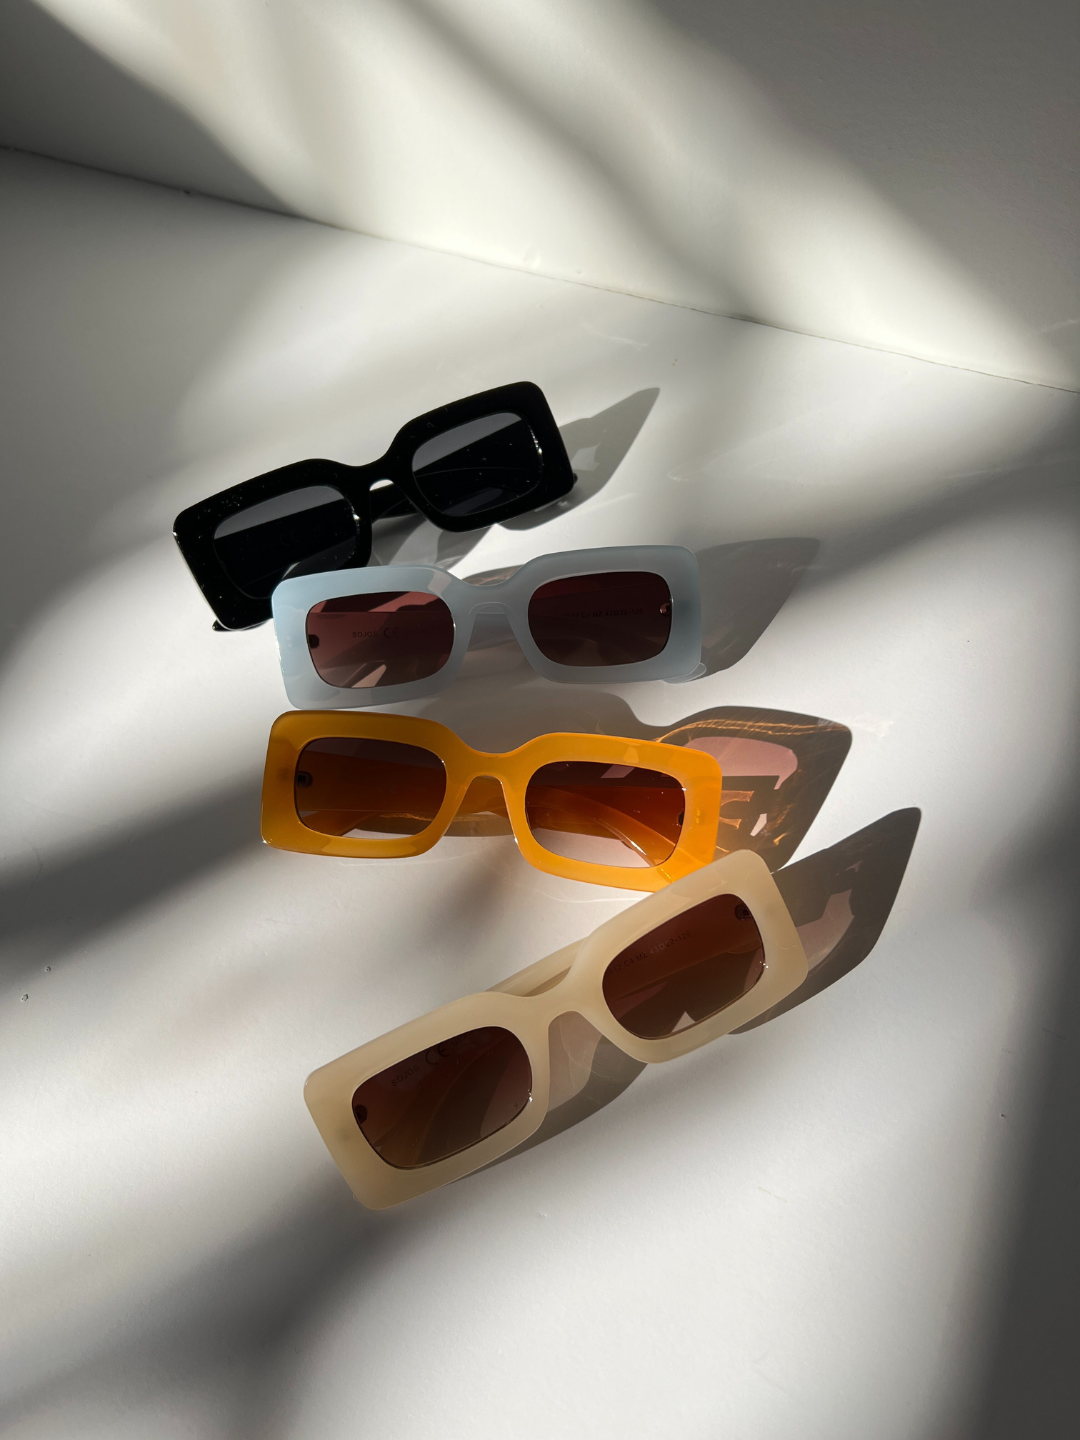 Cream | Group of kids rectangle sunglasses in black, blue, orange and cream, arranged on a white background.